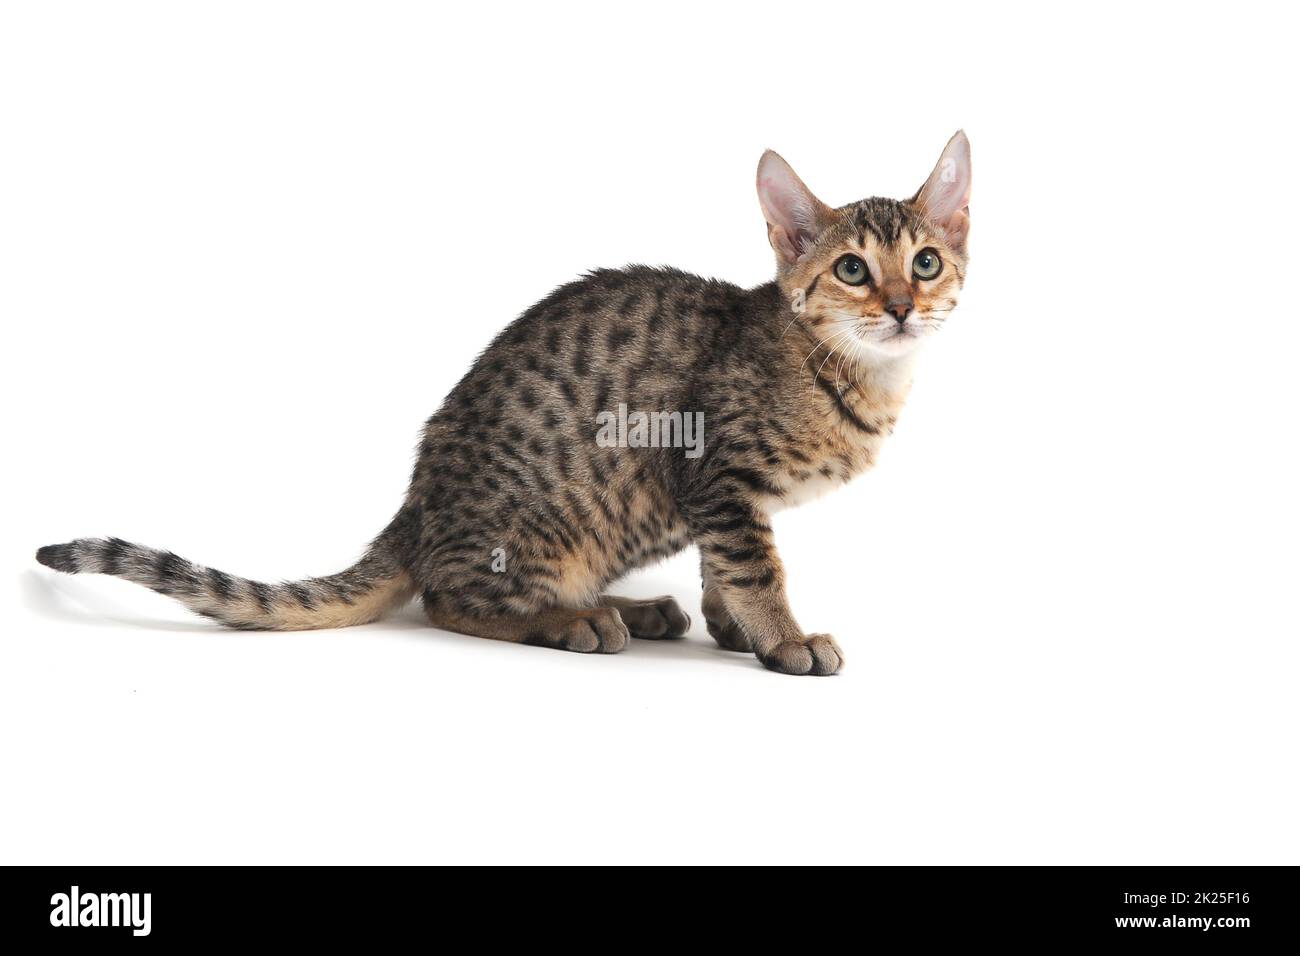 Purebred smooth-haired kitten on a white background Stock Photo